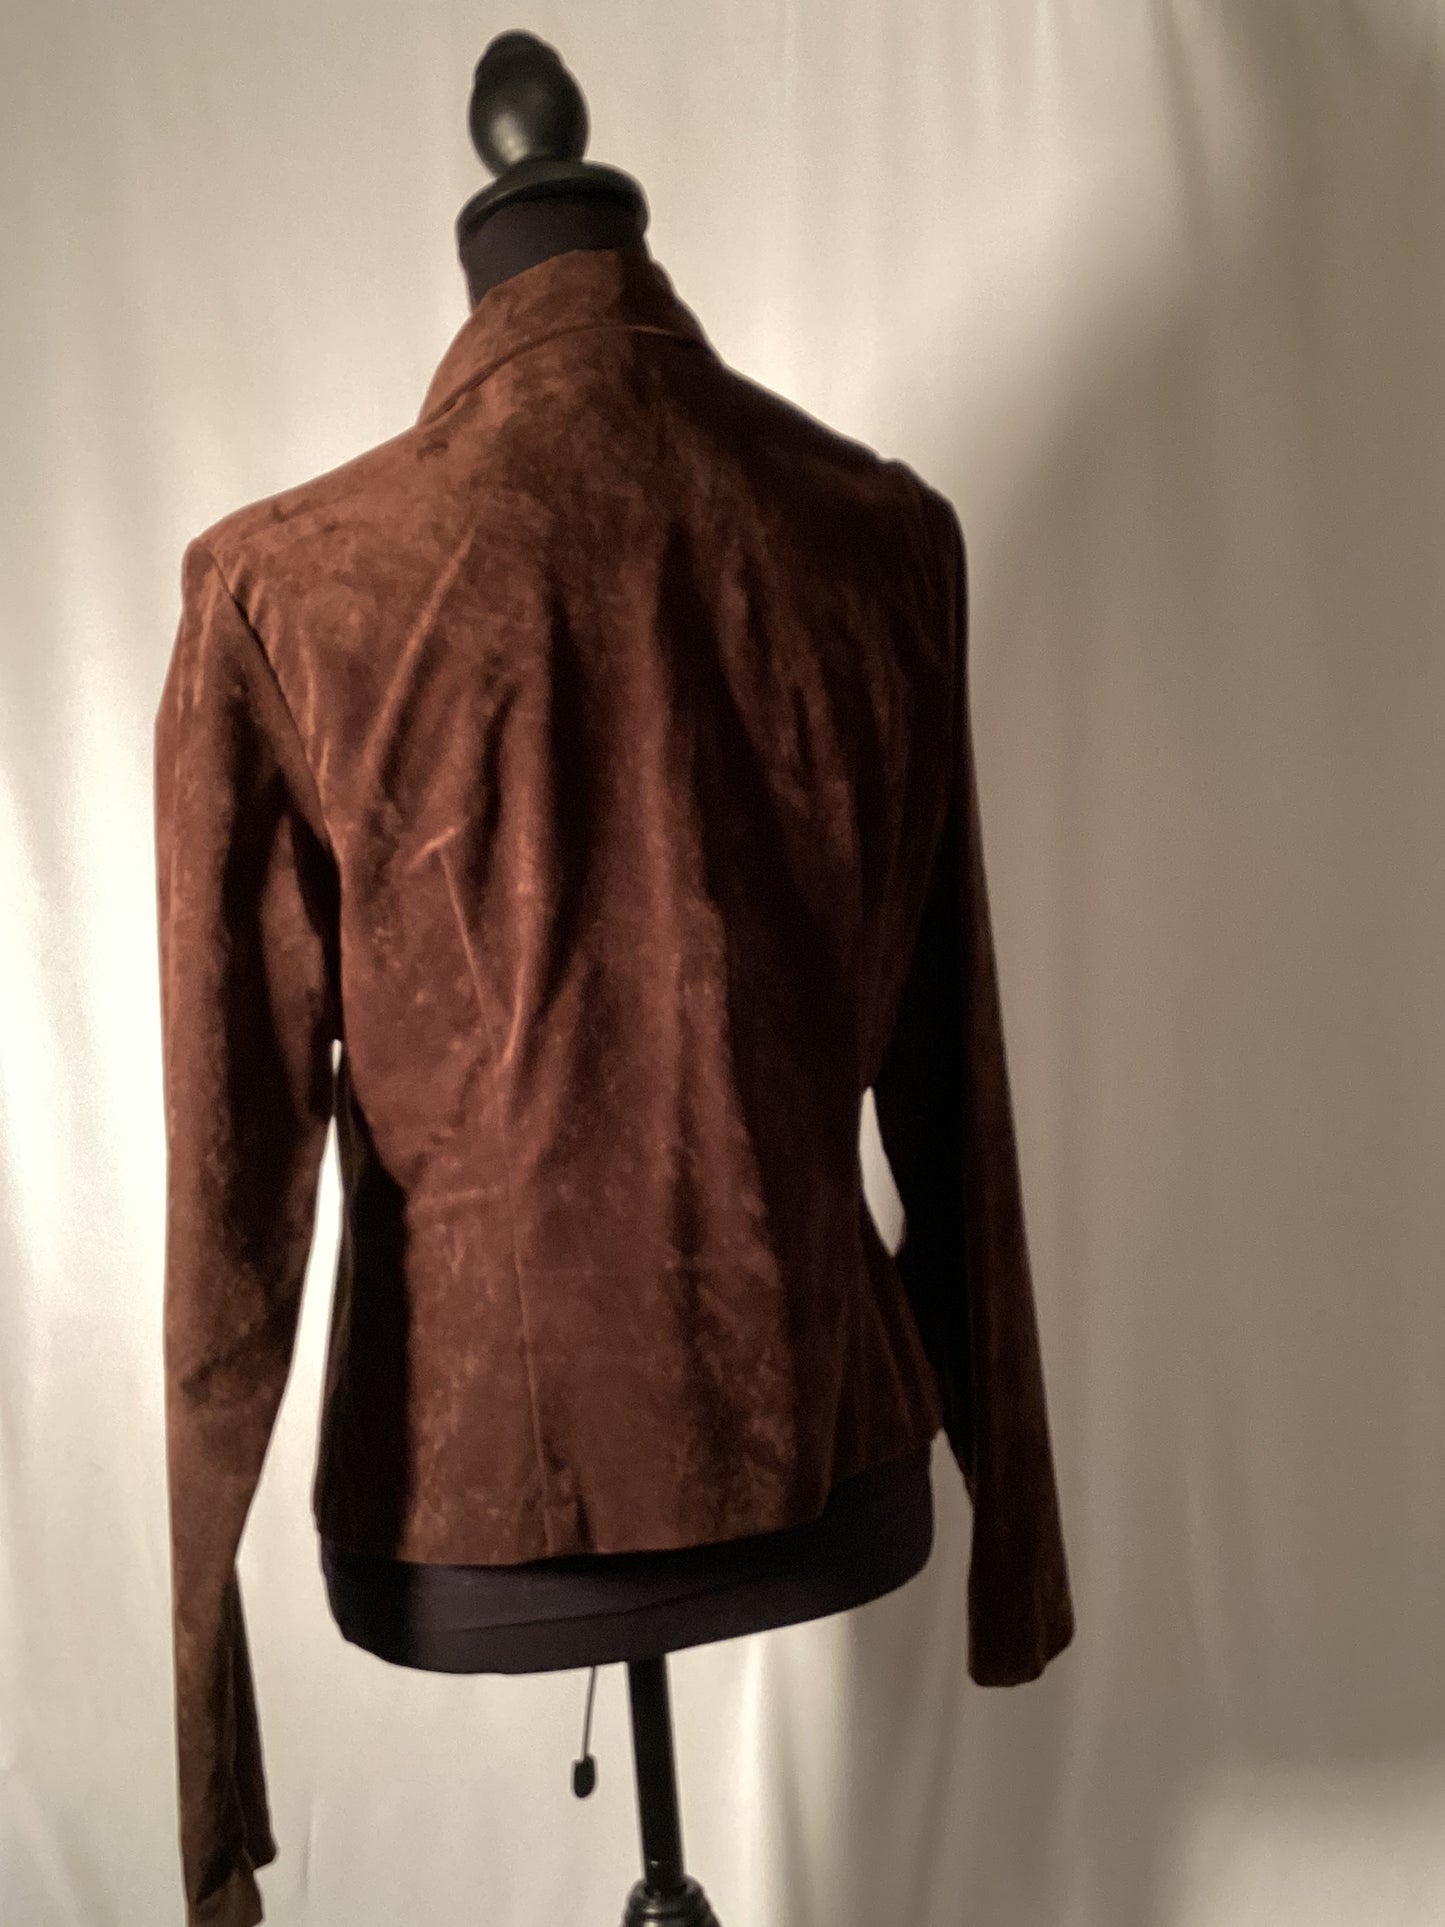 Small Dark Brown Suede Jacket with zipper 100%rayon